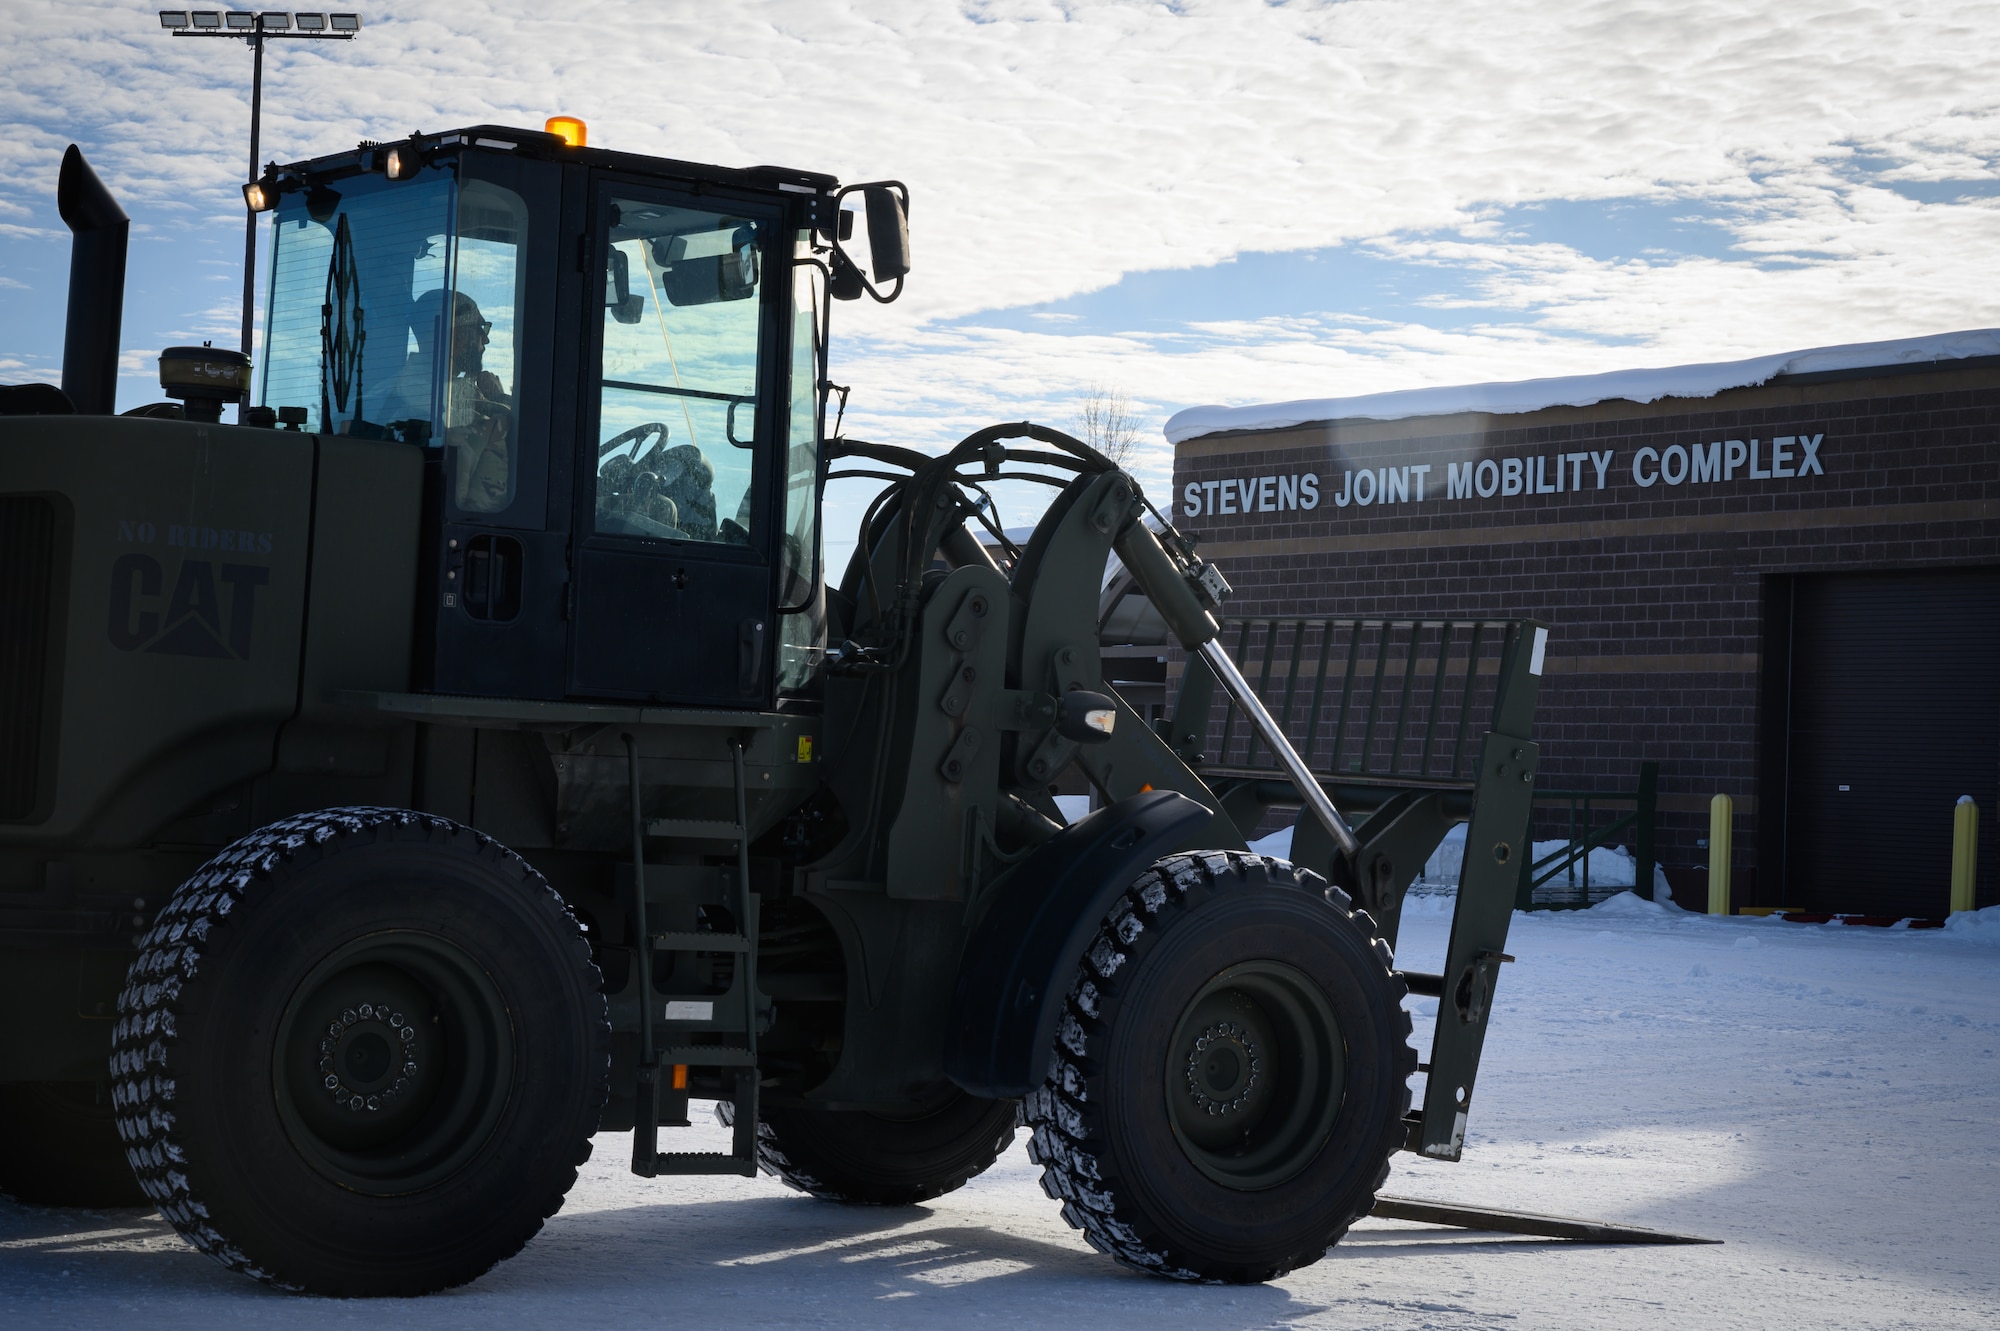 U.S. Air Force Airman 1st Class Tyler Drayton, 354th Logistics Readiness Squadron ground transportation operator journeyman, sits parked in a forklift outside the Stevens Joint Mobility Complex at Eielson Air Force Base, Alaska, during exercise Arctic Gold 23-1, March 7, 2023.